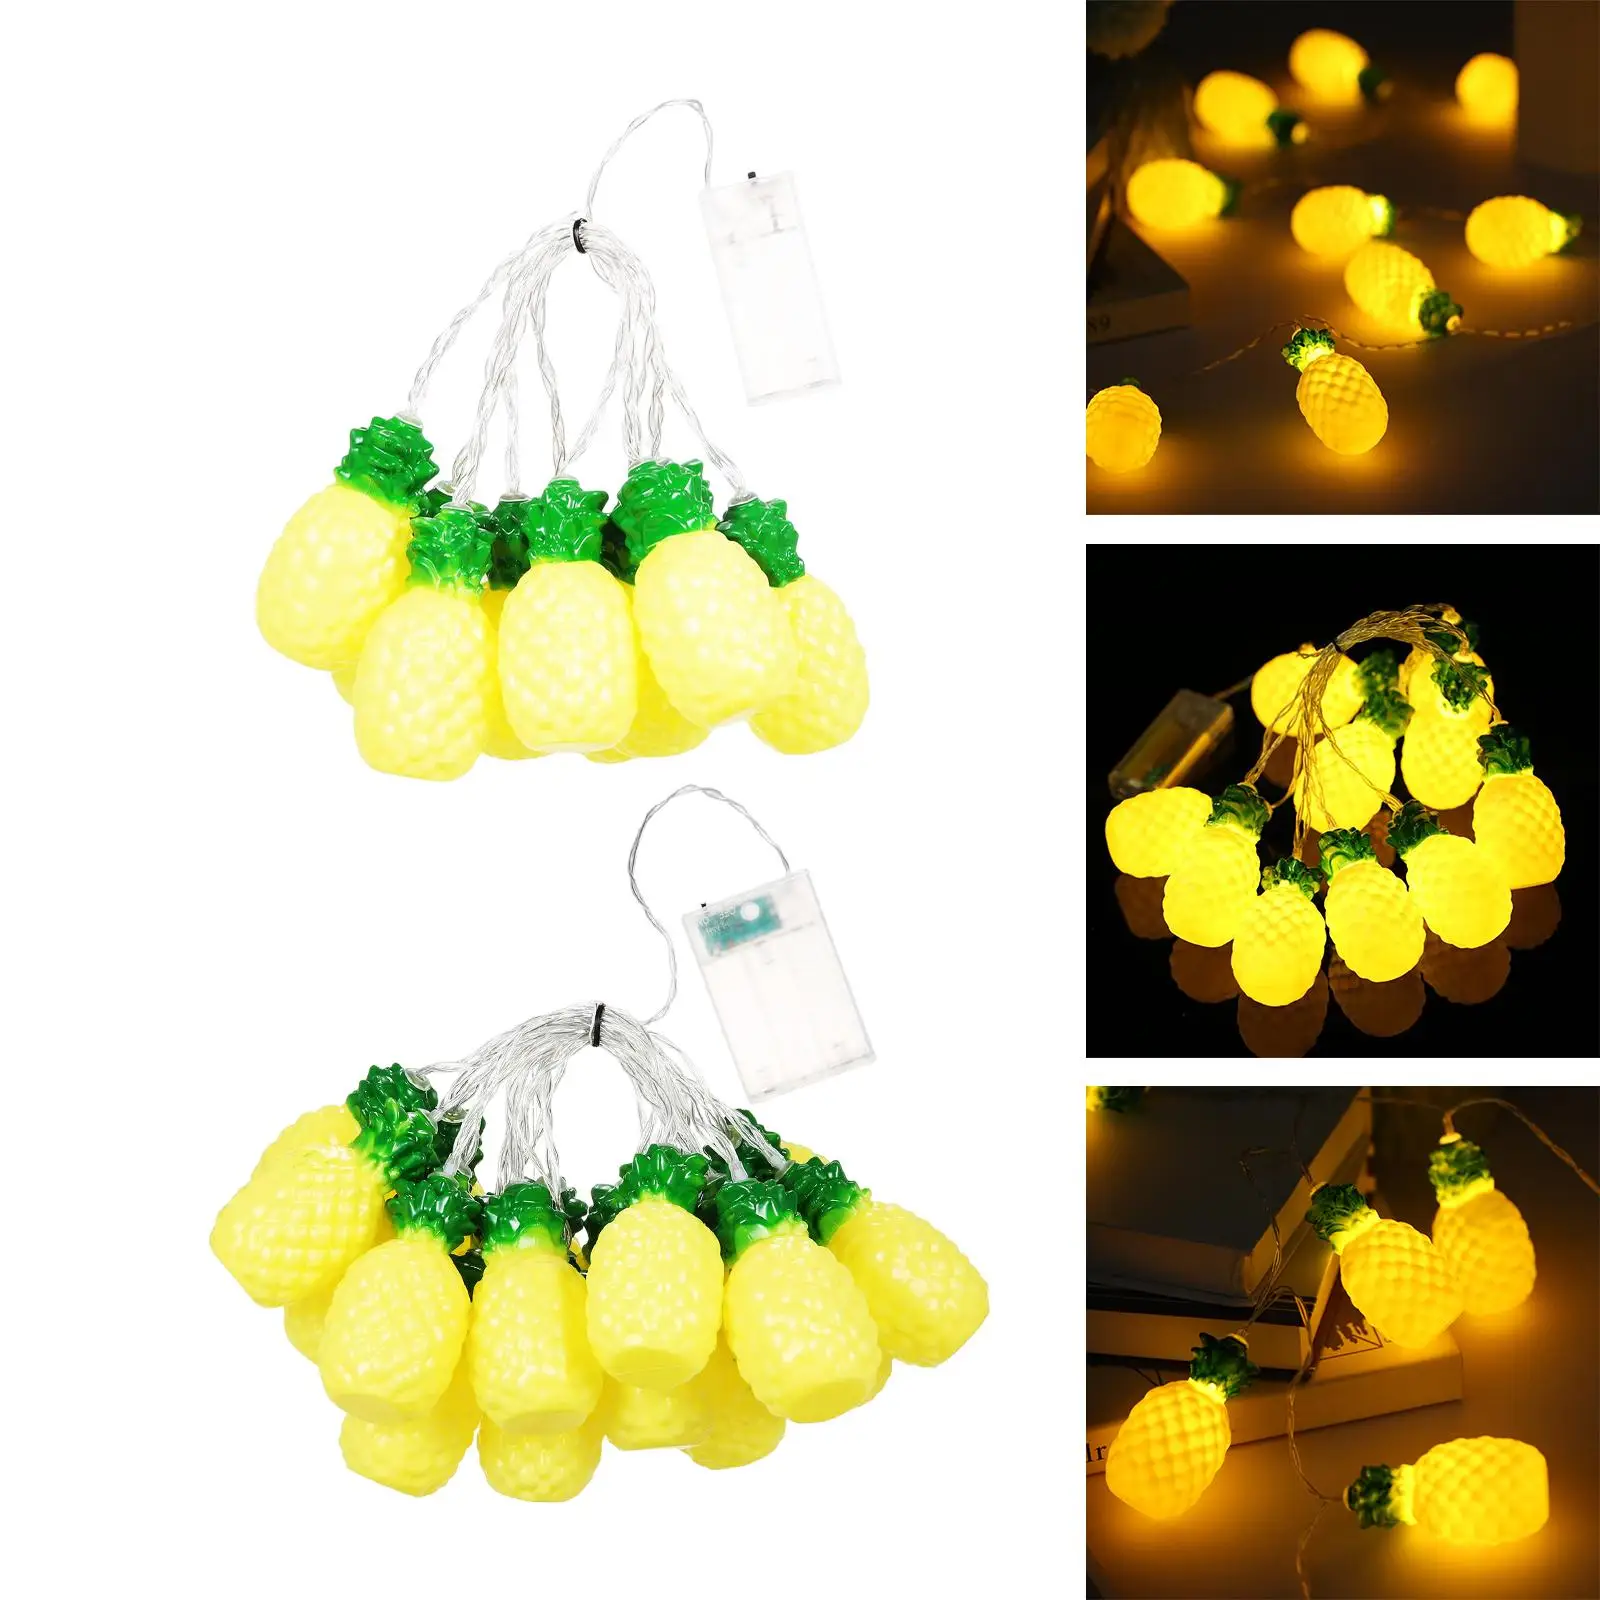 LED Fairy Lights Garland Lights Decoration Outdoor Waterproof Pineapple String Lights for Christmas Halloween Fence Lawn Porch